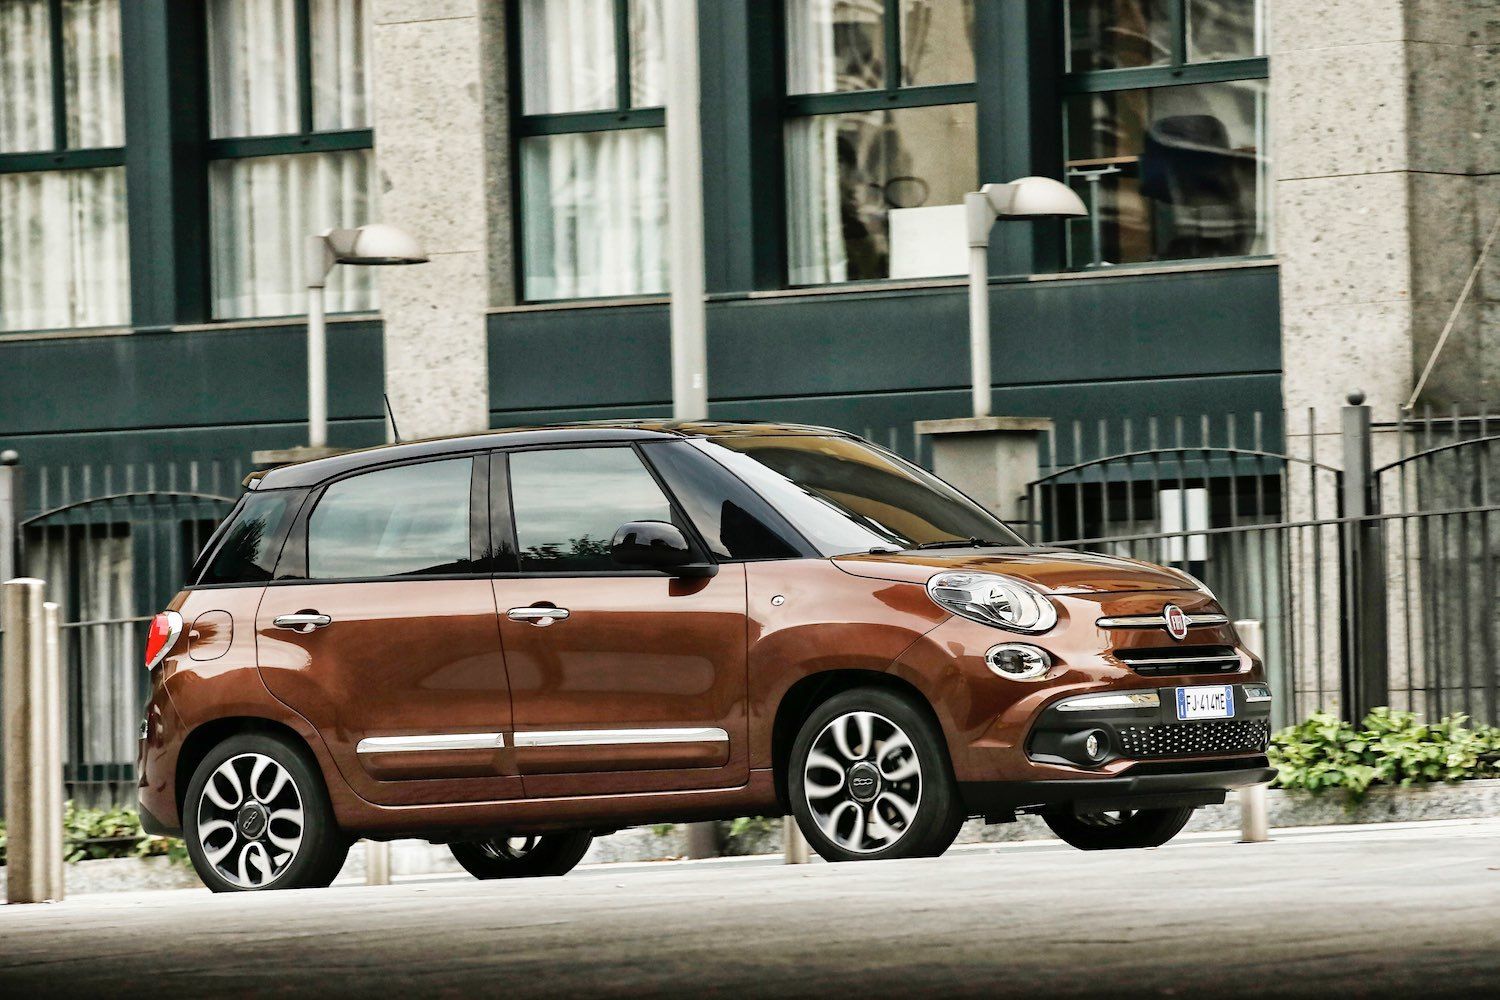 Tim Barnes-Clay reviews the New Fiat 500L from the first drive in Italy 16